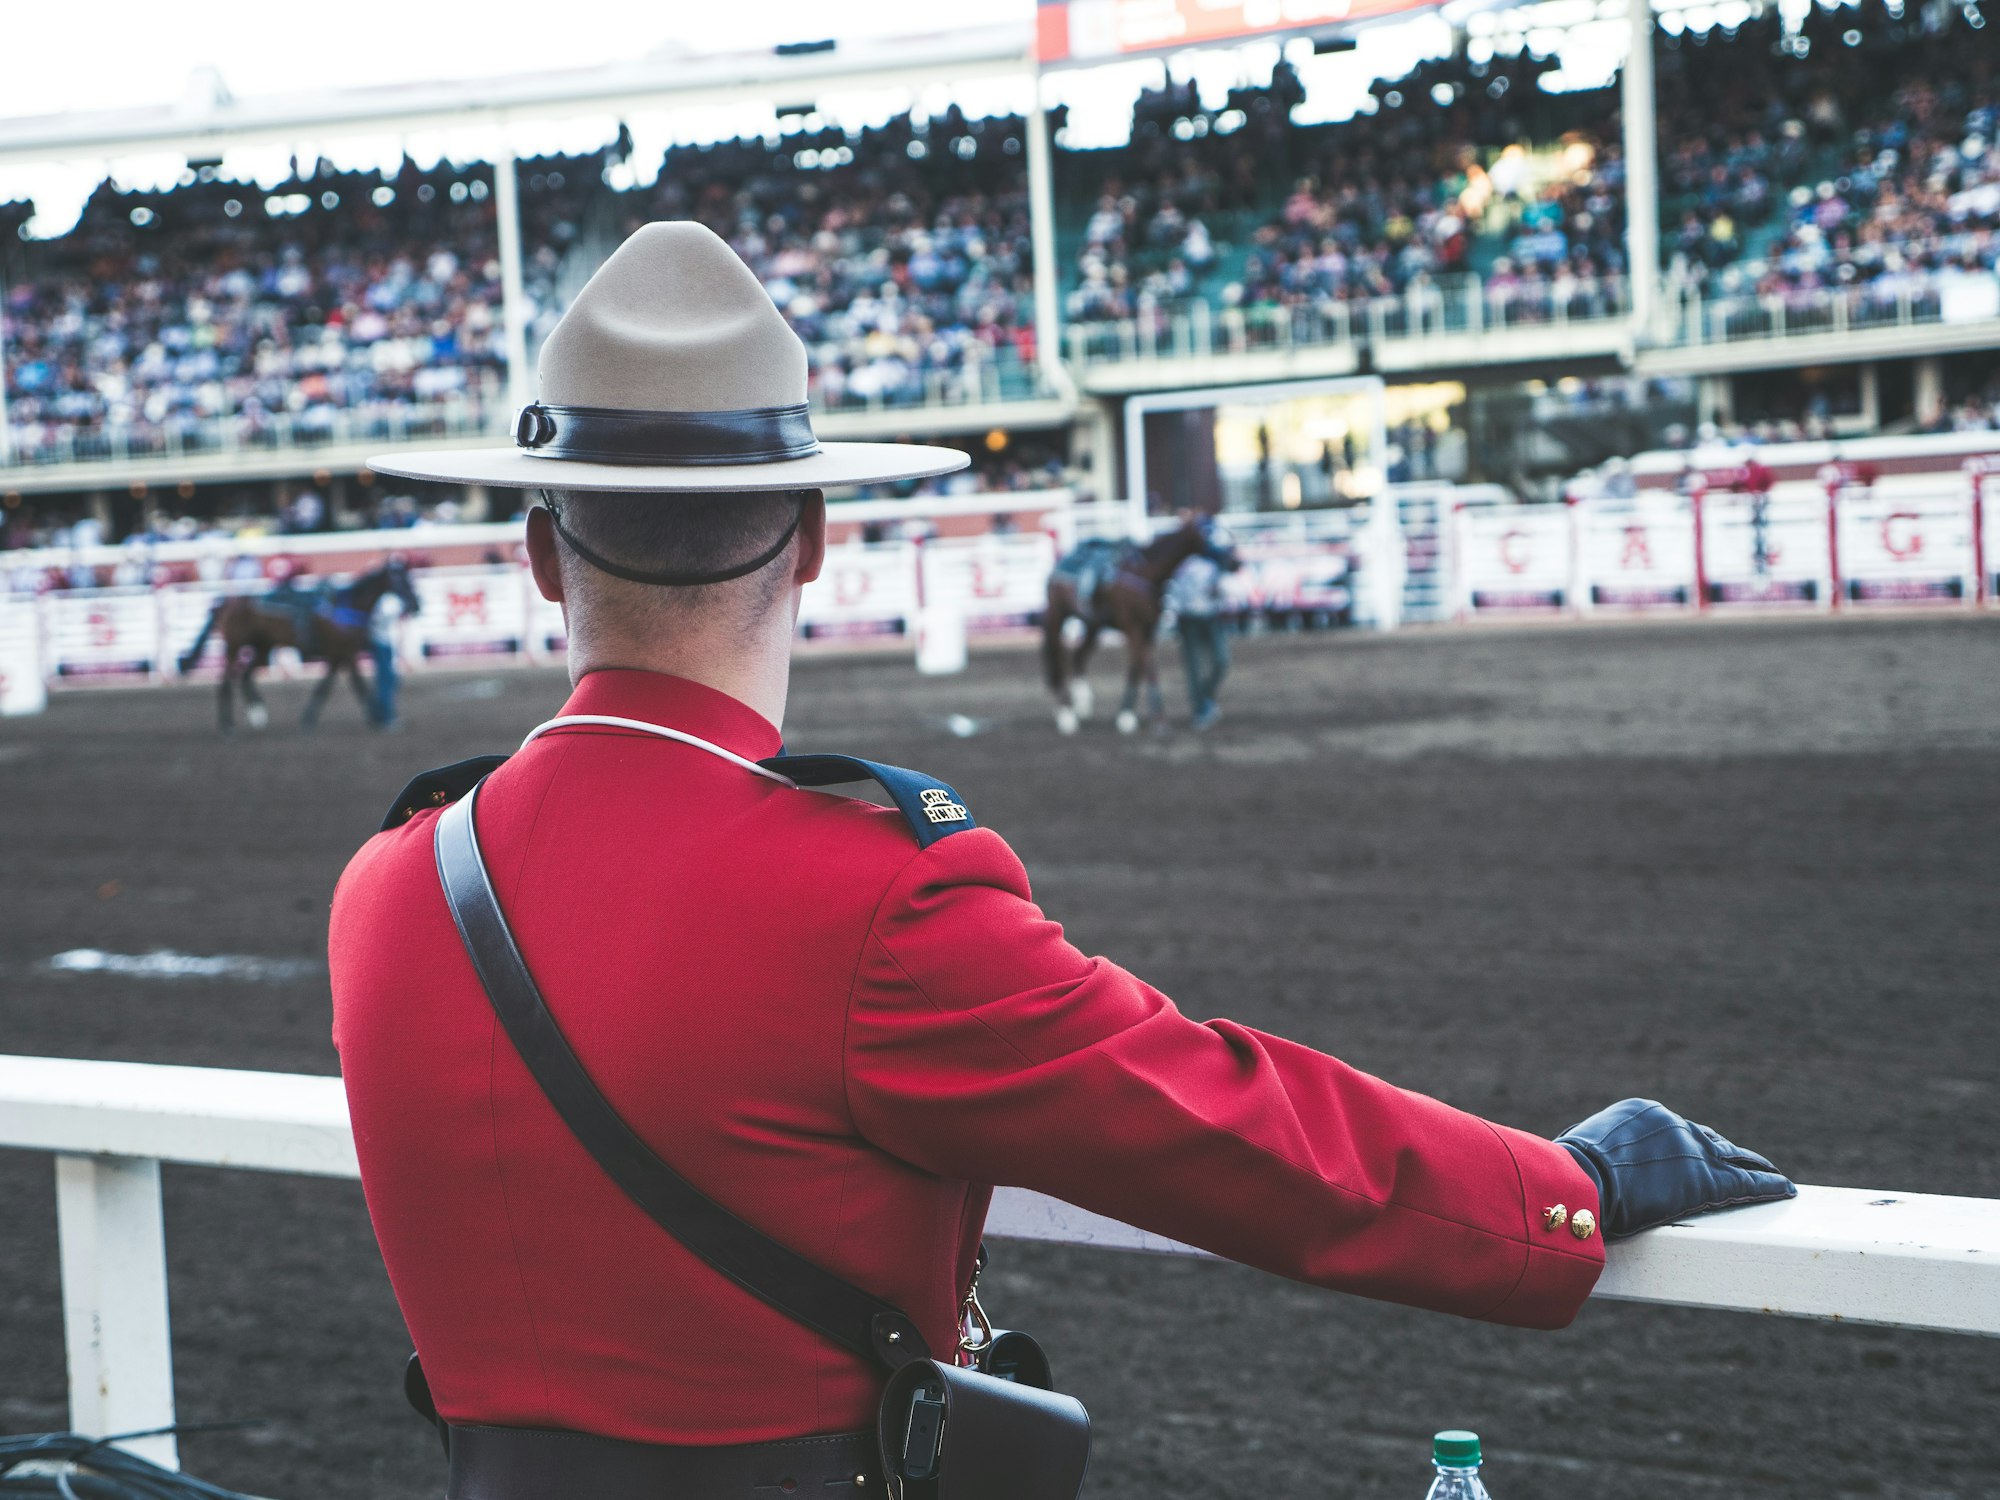 The Calgary Stampede is a great tradition in Calgary. People from all over the world travel to our city to take in the specticle full of western themed entertainment, music, carnival rides, games, food and fun. This moment of an RCMP officer in the traditional Mountie uniform, watching the horses at the chuckwagon races is a moment of calm after he accompanied our nations flag on stage for our national anthem, O’Canada.